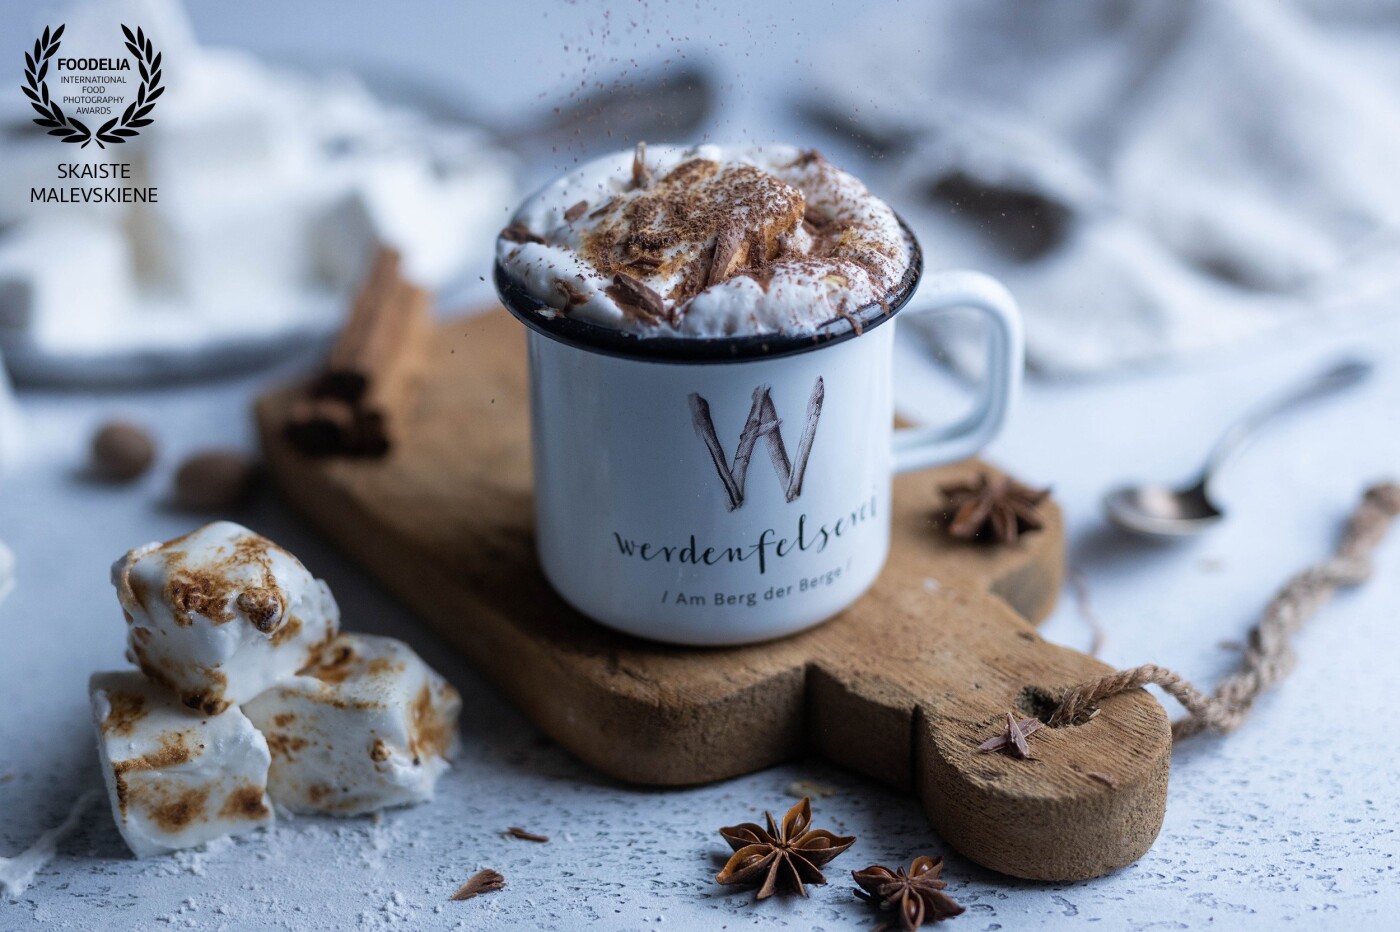 The hot chocolate season is here and making it with a home made marshmallows is such a game changer. It immediately became our families HIT. I hope this photo conveys the contrast of frosty weather and a cup of warm hot chocolate.